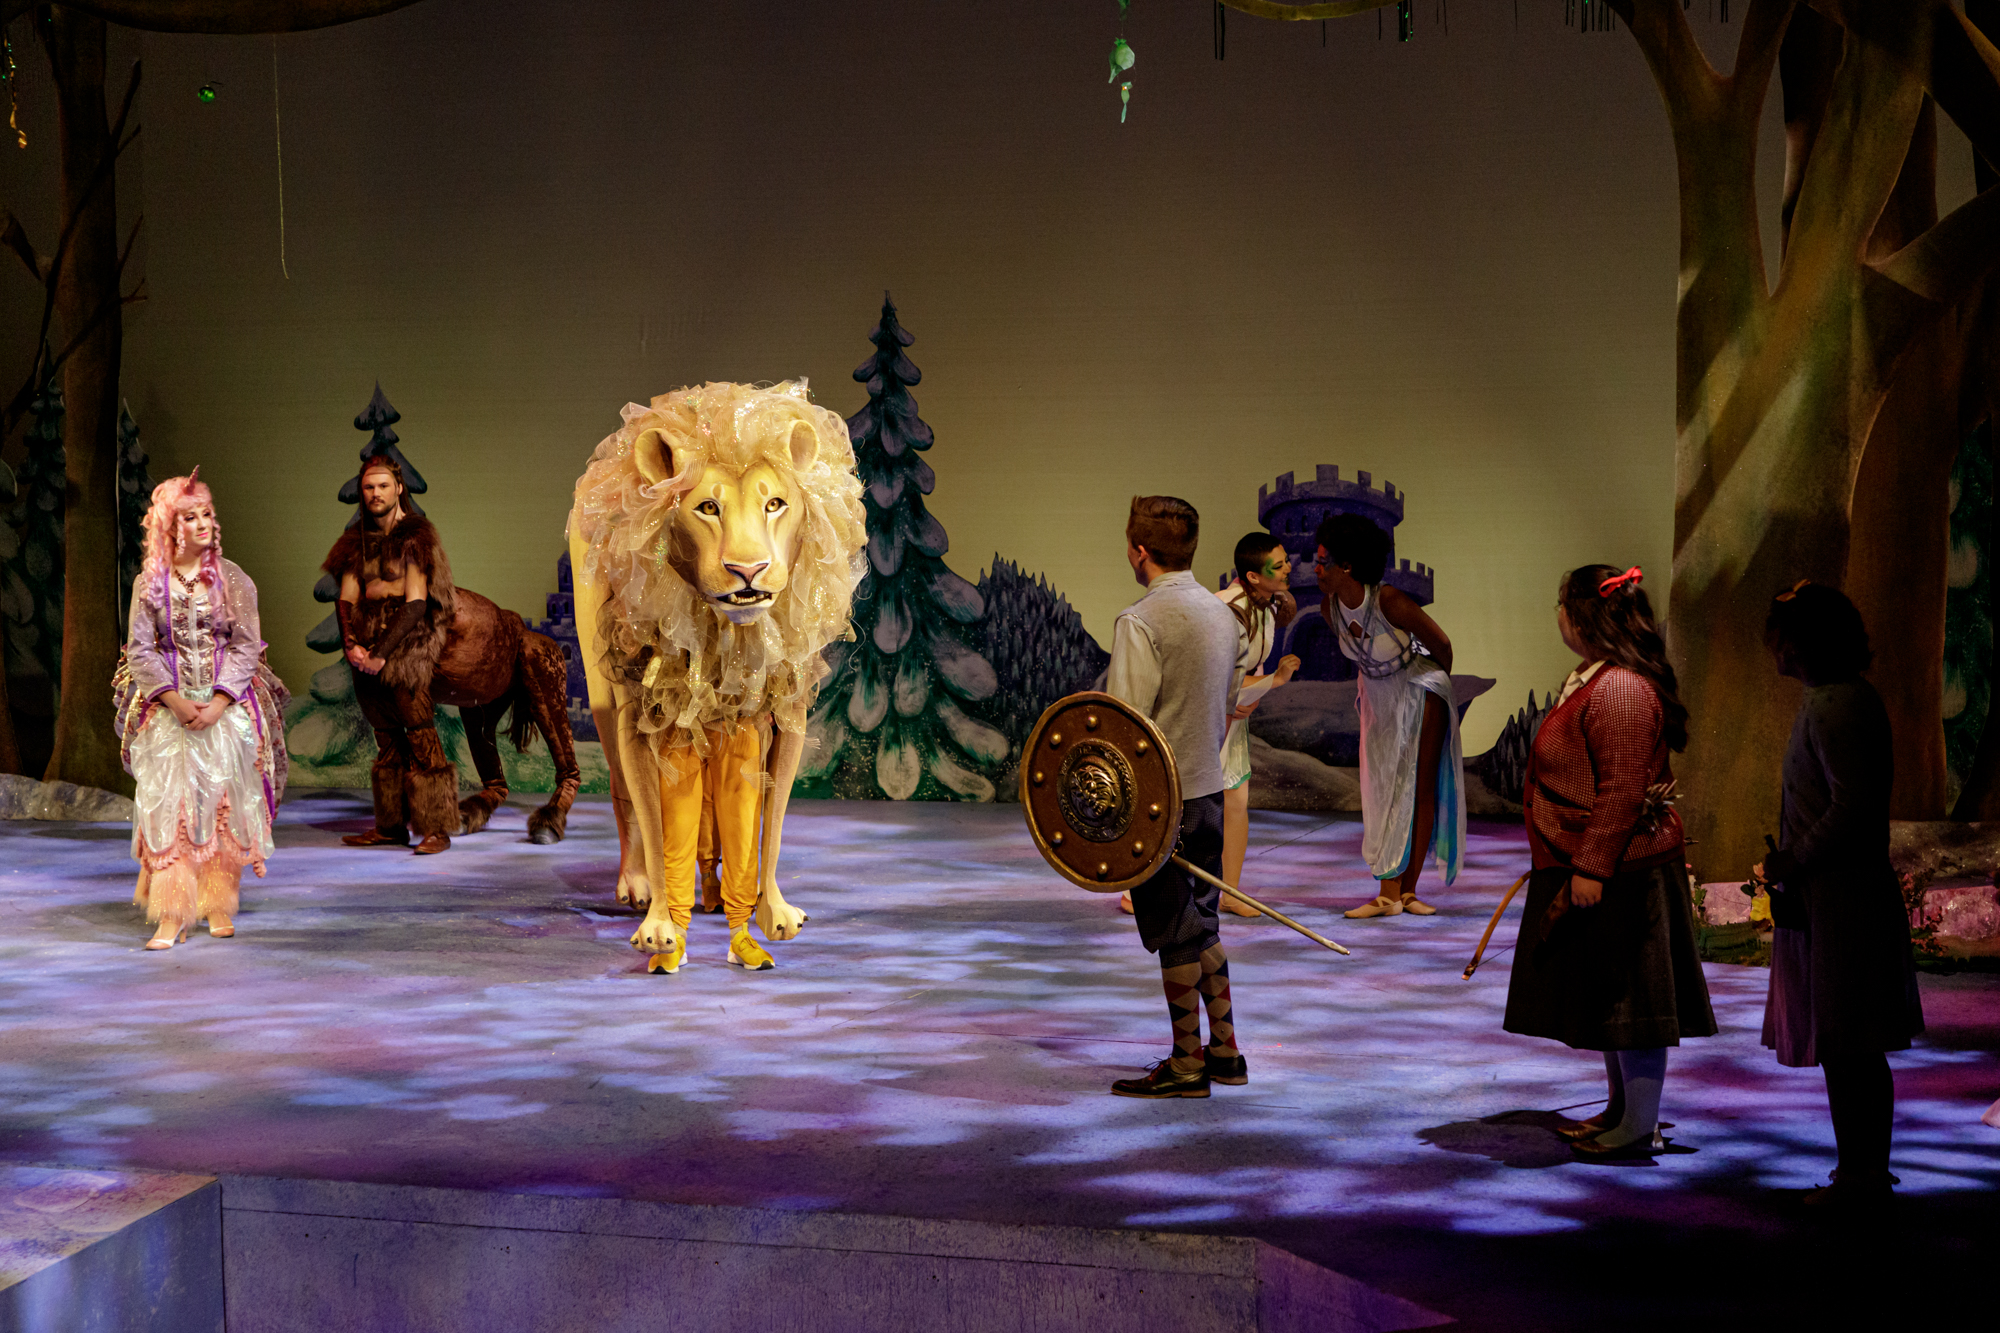 The Lion, the Witch, and the Wardrobe by Syracuse Stage - Issuu